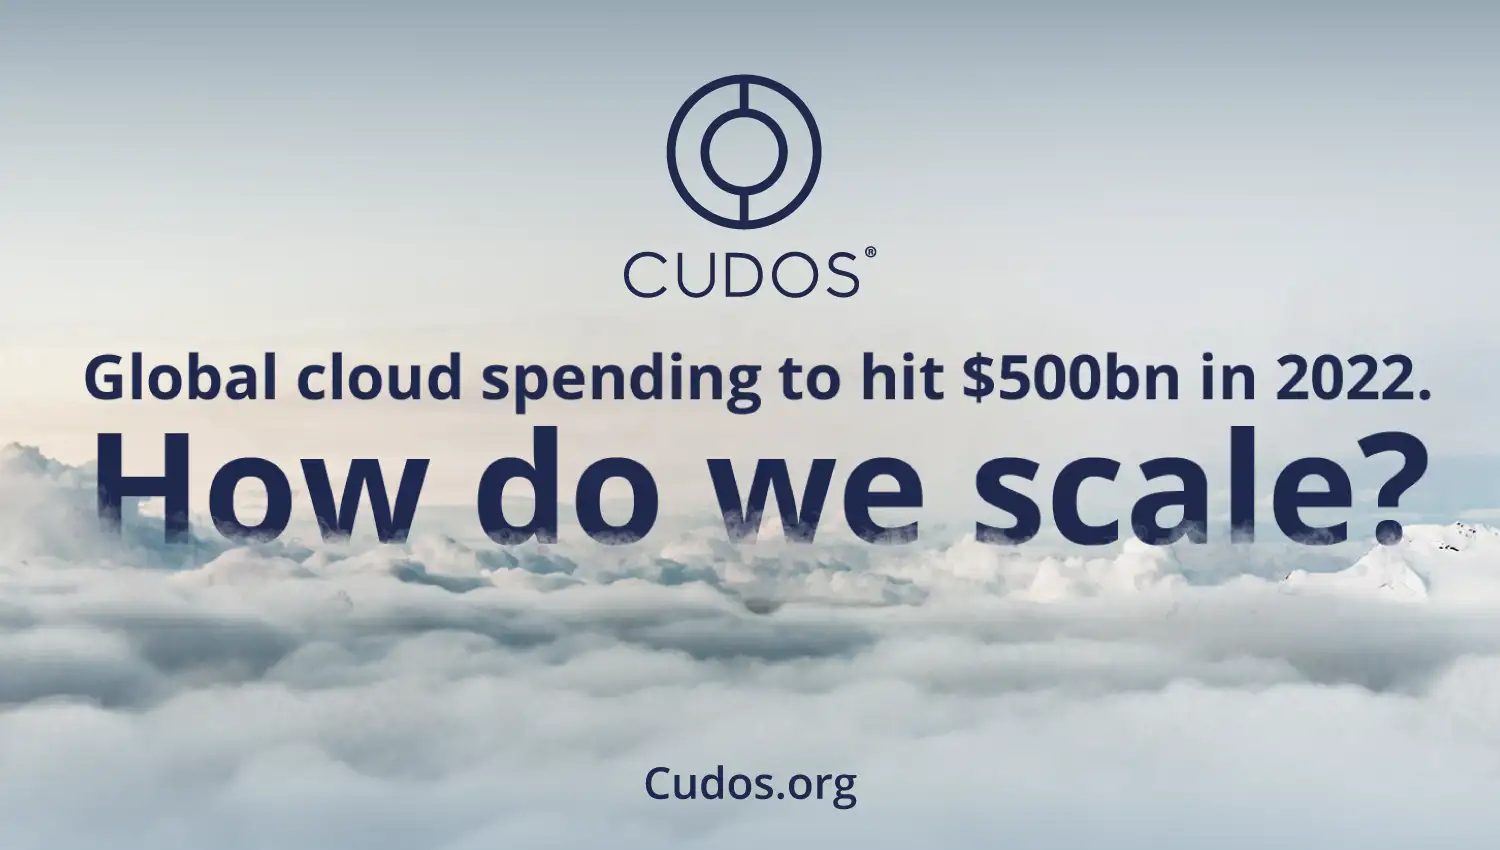 Cloud spending to hit $500bn in 2022. How do we scale? cover photo